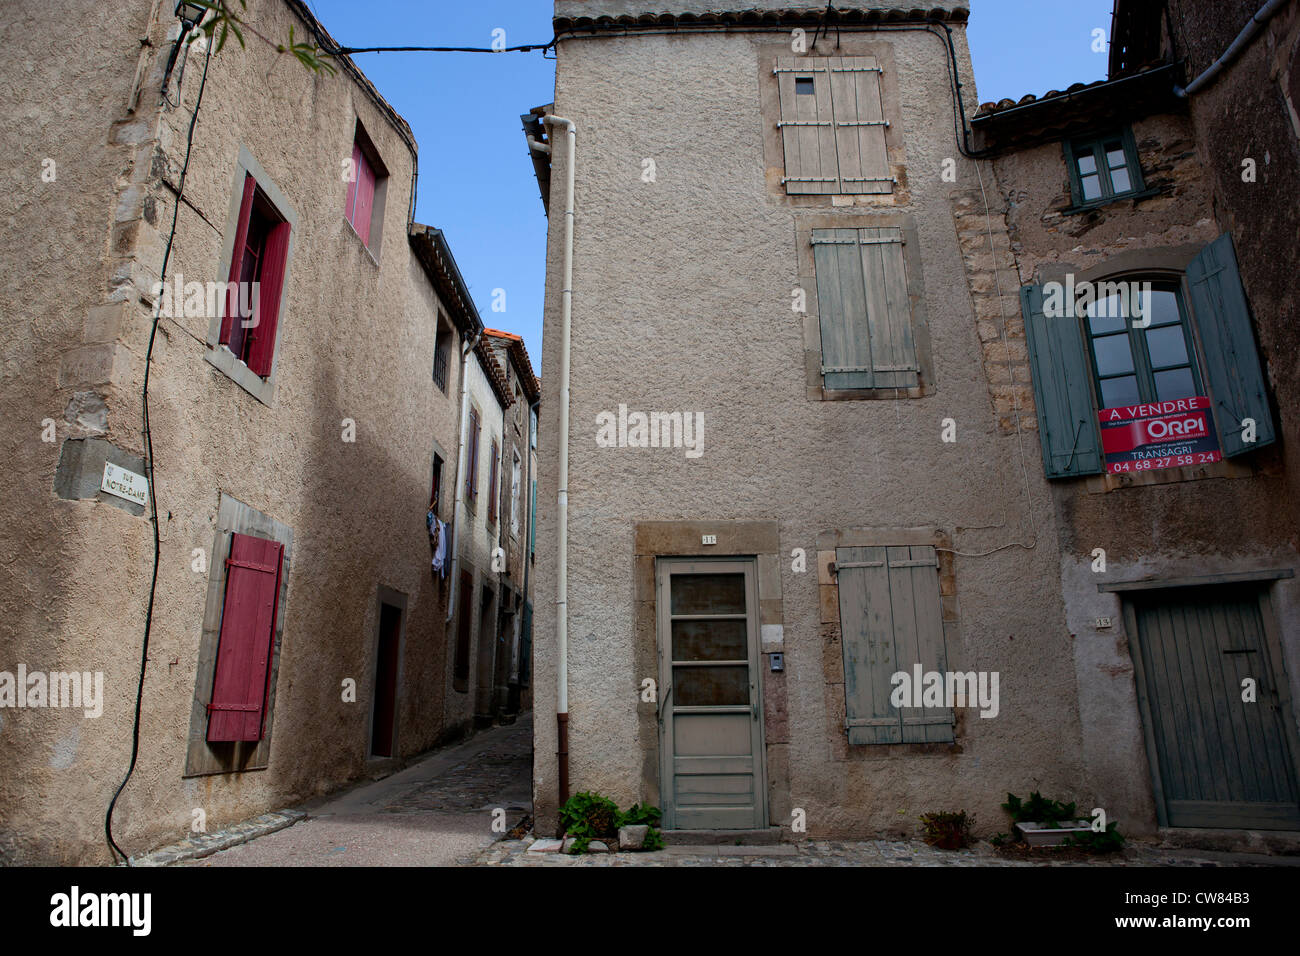 Old buildings with colourful shutters in the village of Caune-Minervois, in Southern France Stock Photo